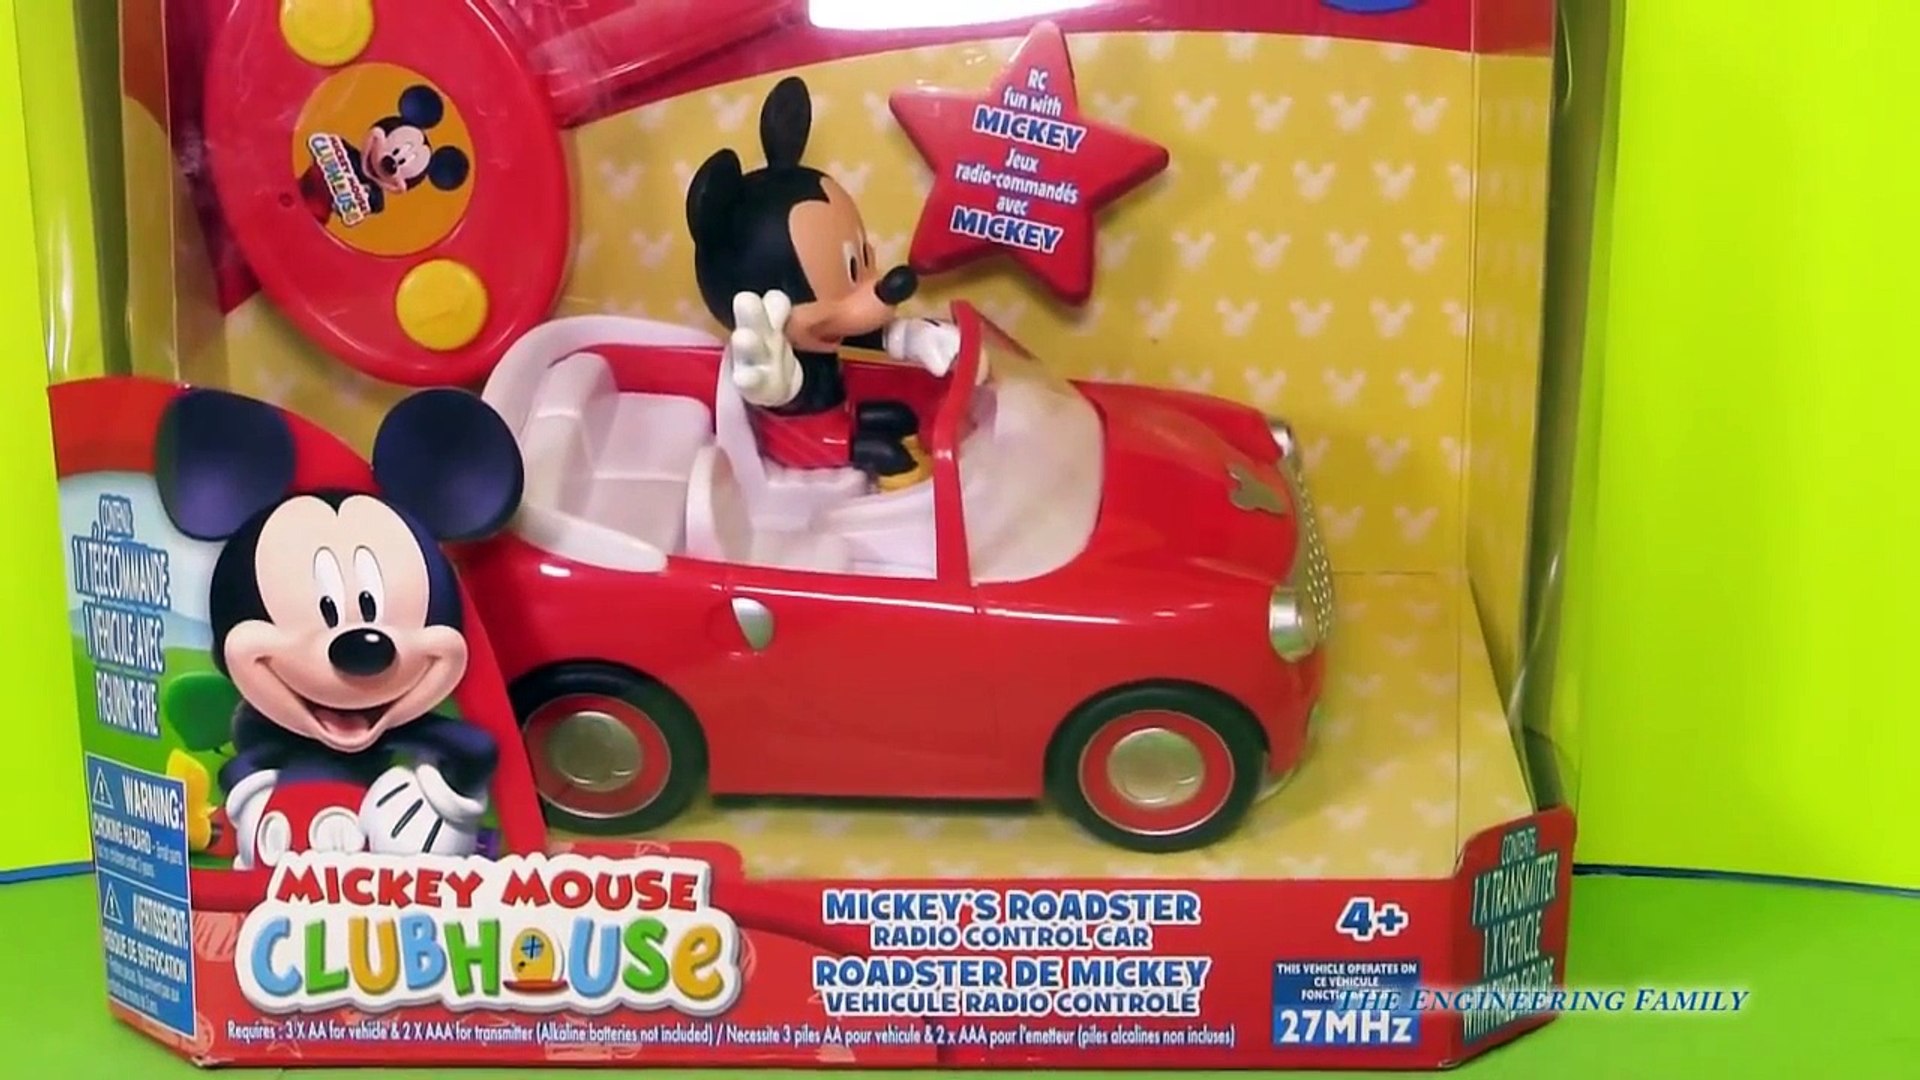 MICKEY MOUSE CLUBHOUSE Disney Junior Mickey Mouse Remote Control Car a  Disney YouTube Vide - Dailymotion Video